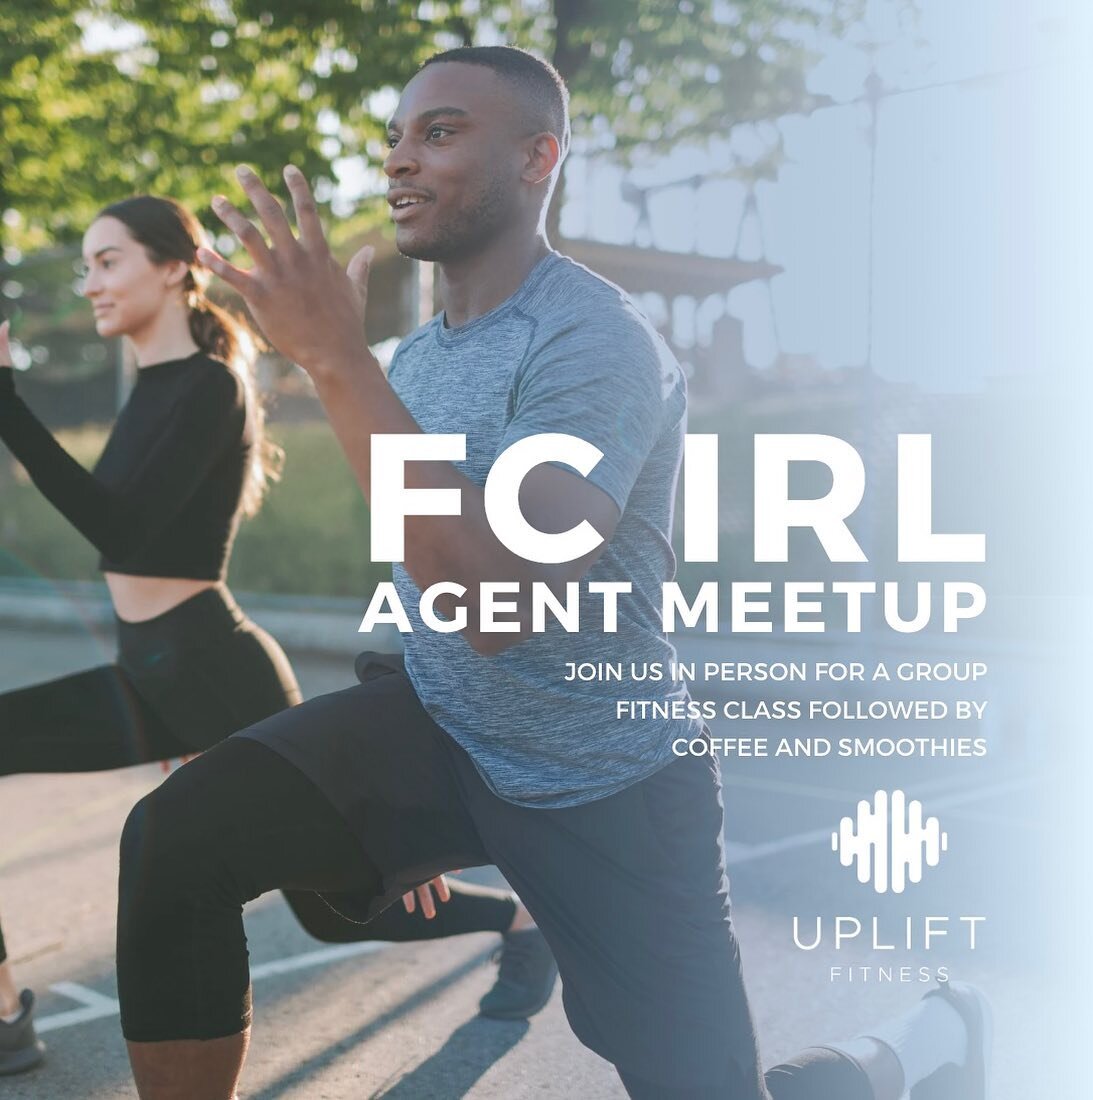 ​We&rsquo;re kicking off our FC IRL series! Join us for an exciting and invigorating fitness class at Uplift in London, Ontario! Get ready to sweat, have fun, and connect with fellow agents in a high-energy atmosphere. REGISTRATION IS REQUIRED! The e